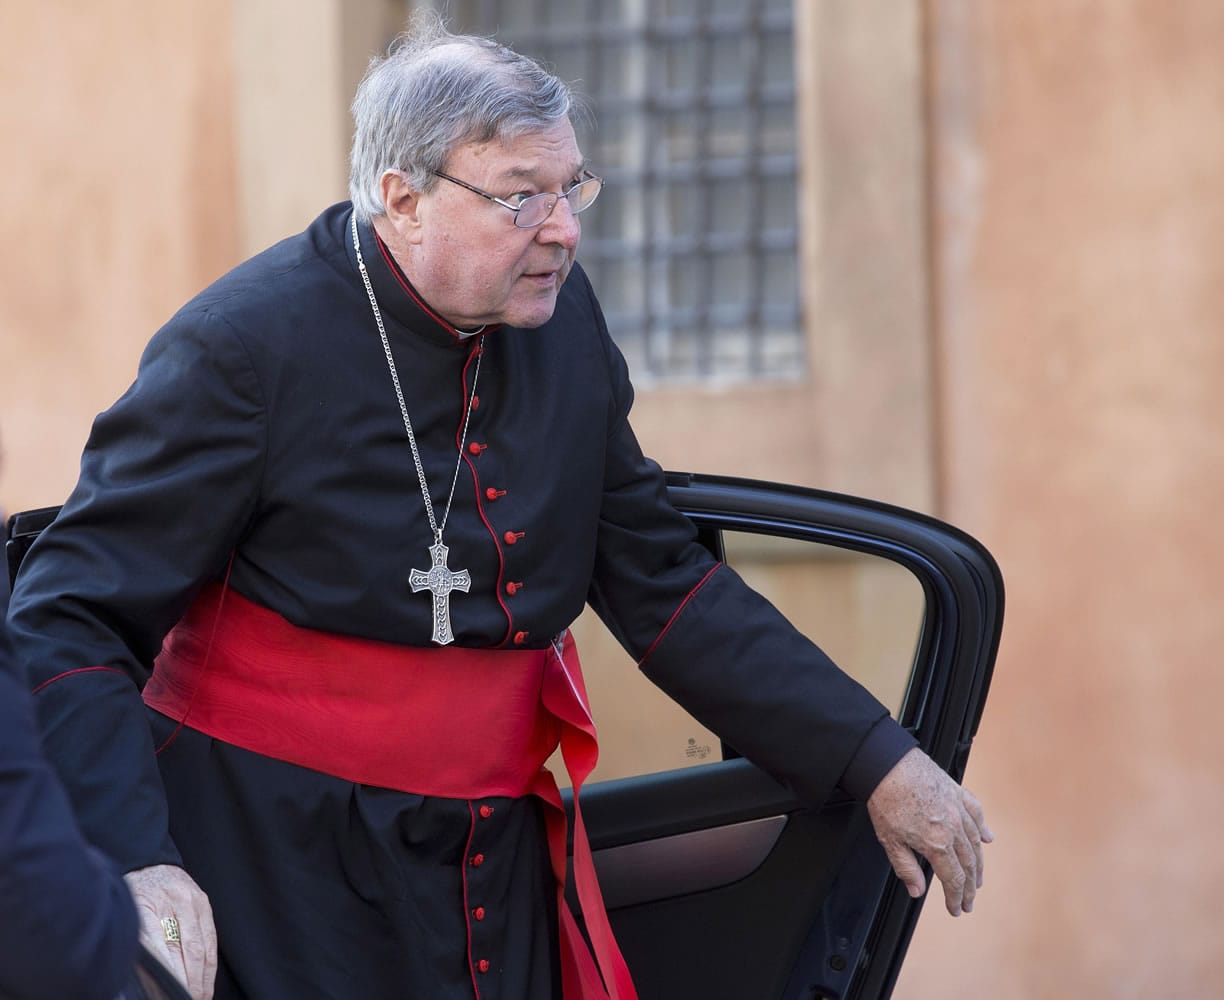 Cardinal George Pell arrives for a morning session of a synod on family issues, at the Vatican.